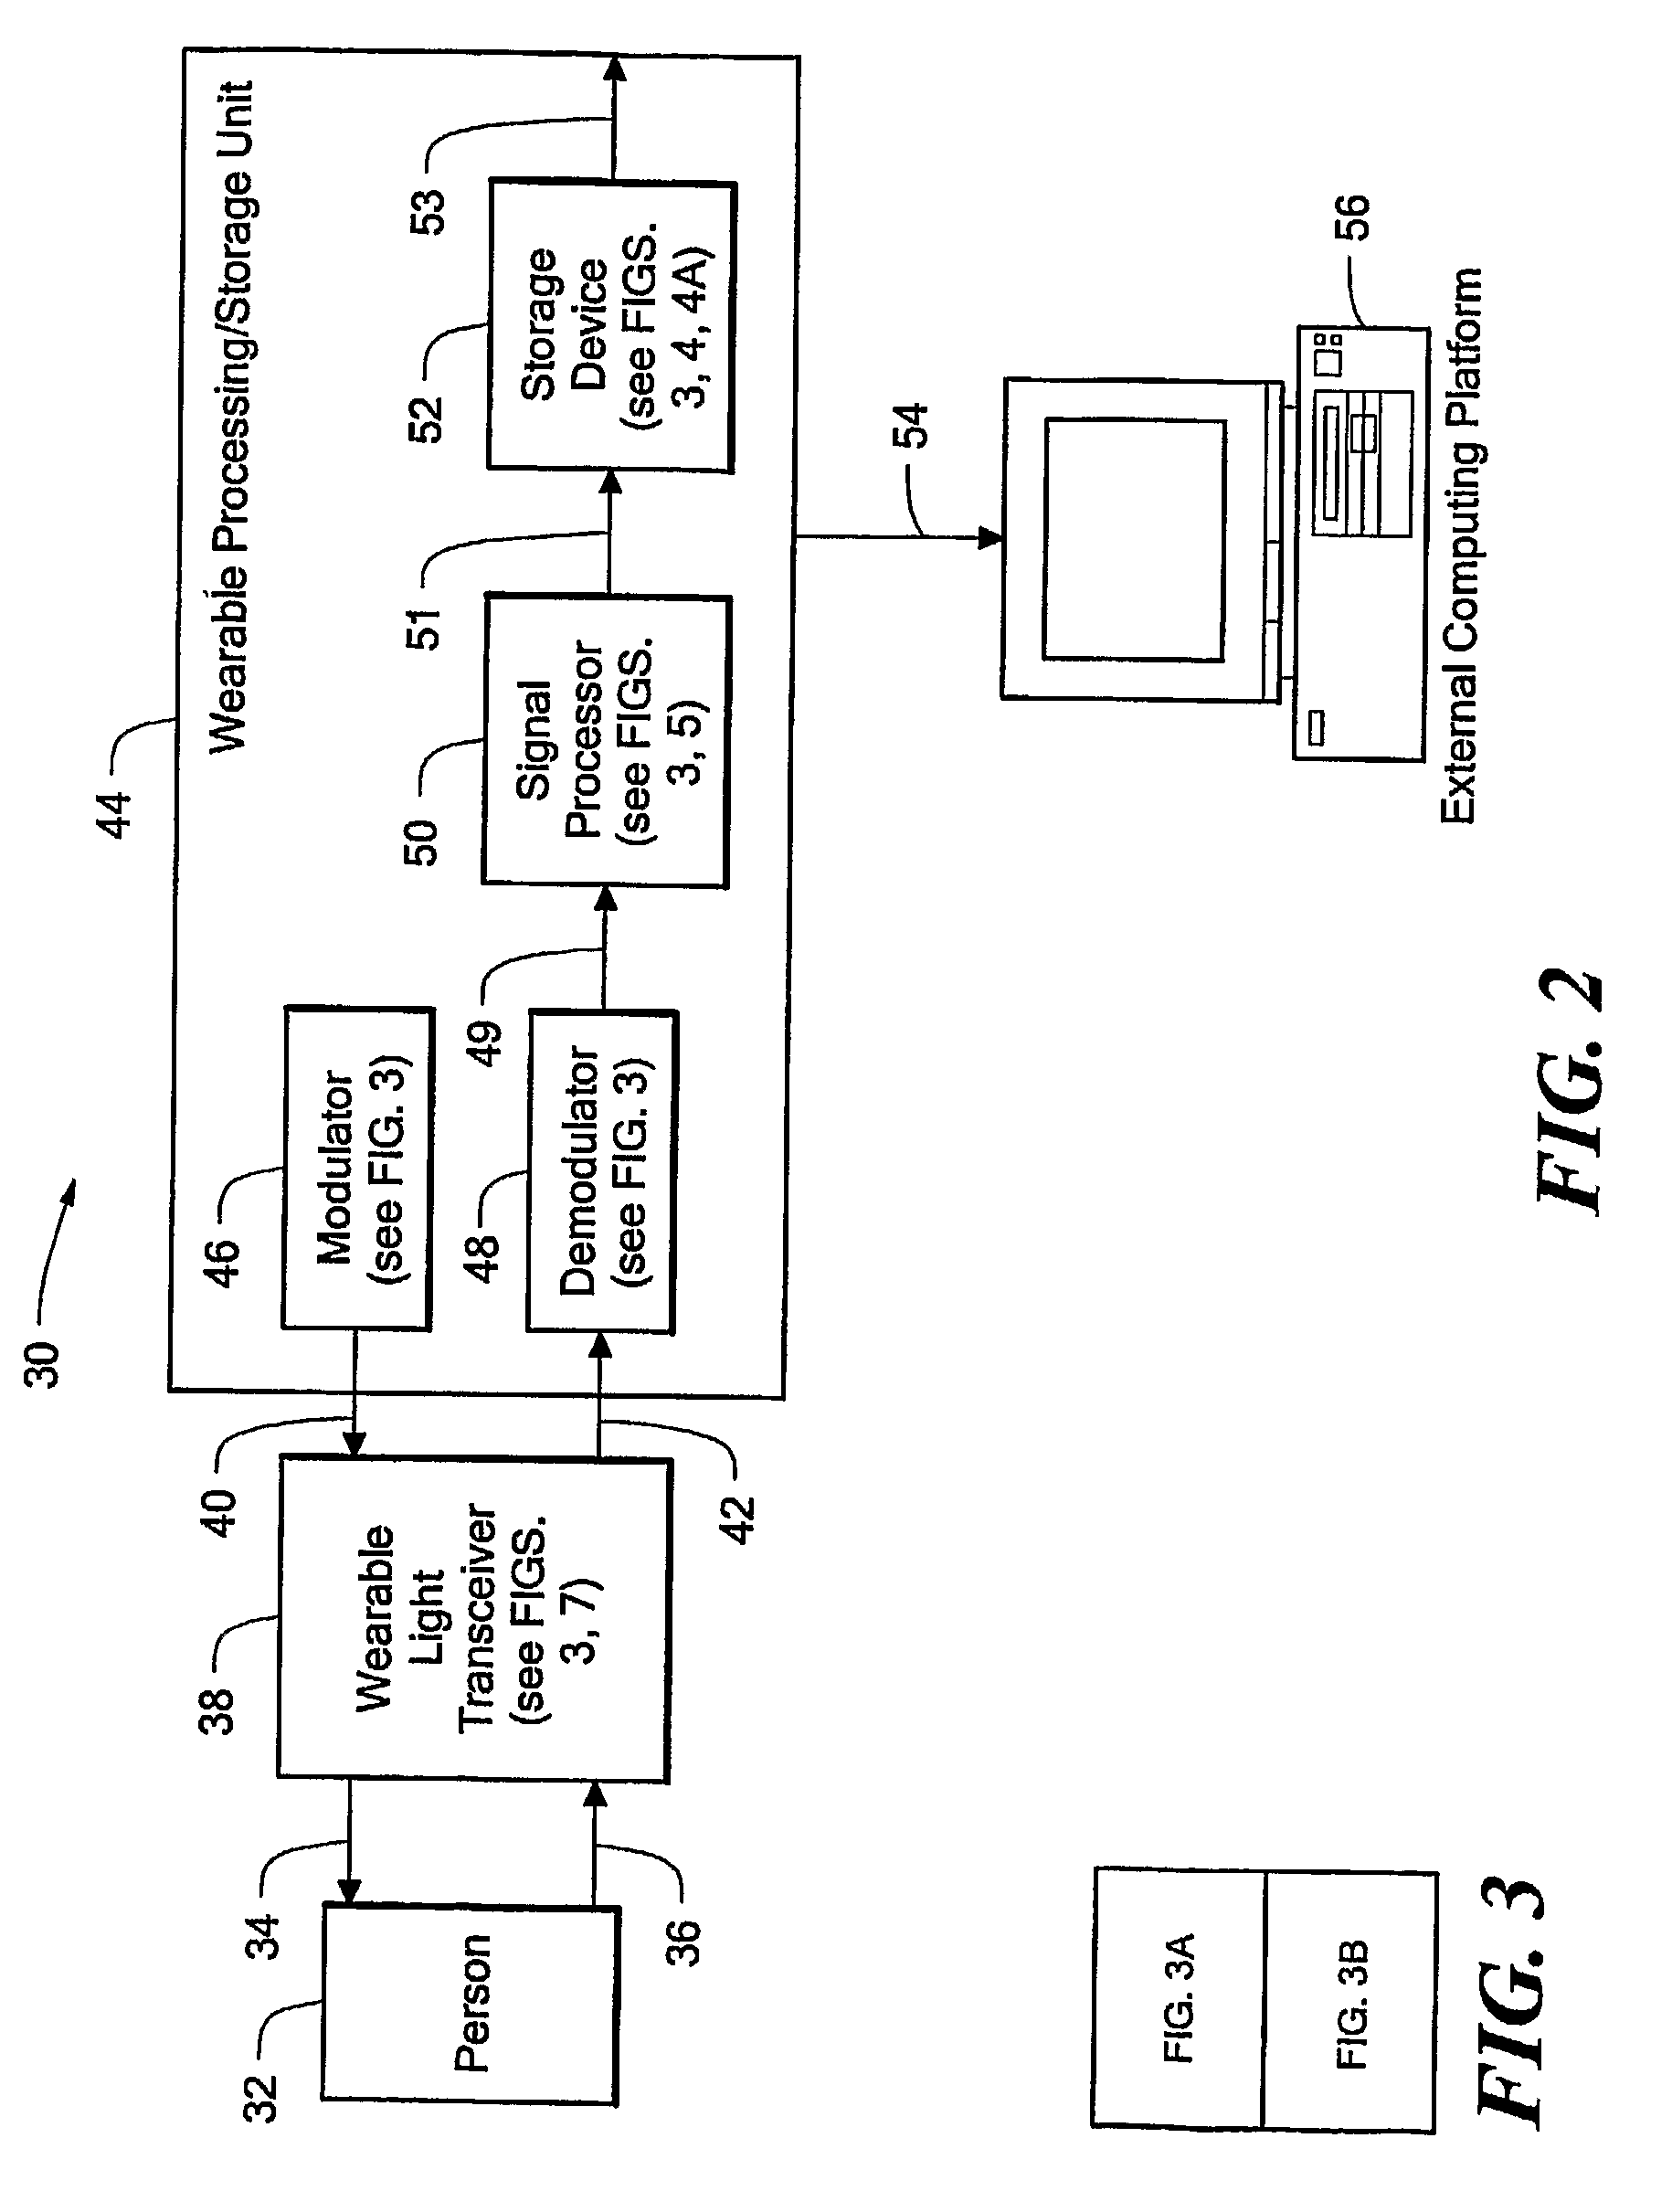 Electro-Optical System, Apparatus, and Method For Ambulatory Monitoring